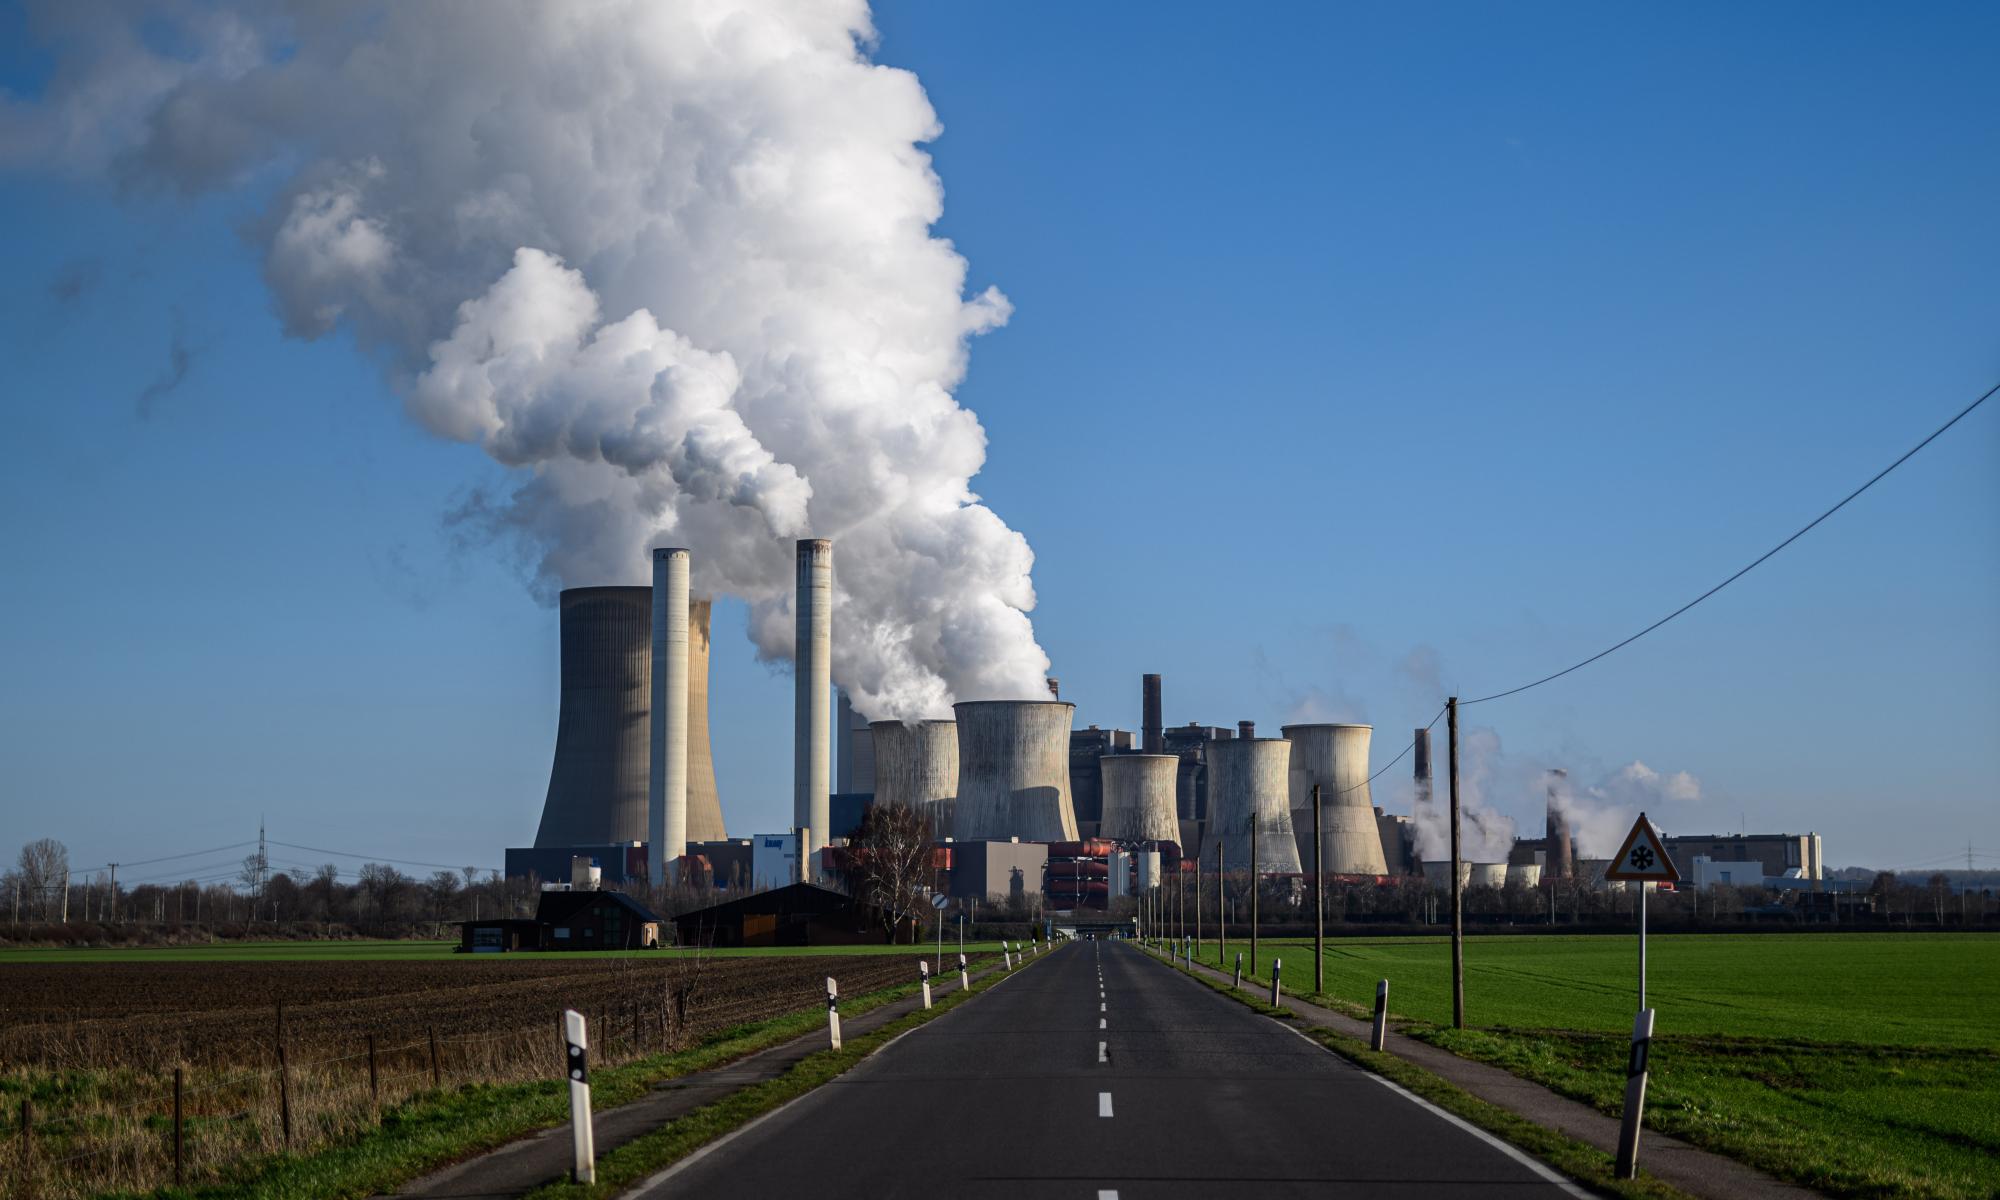 Covid-19 crisis will wipe out demand for fossil fuels, says IEA